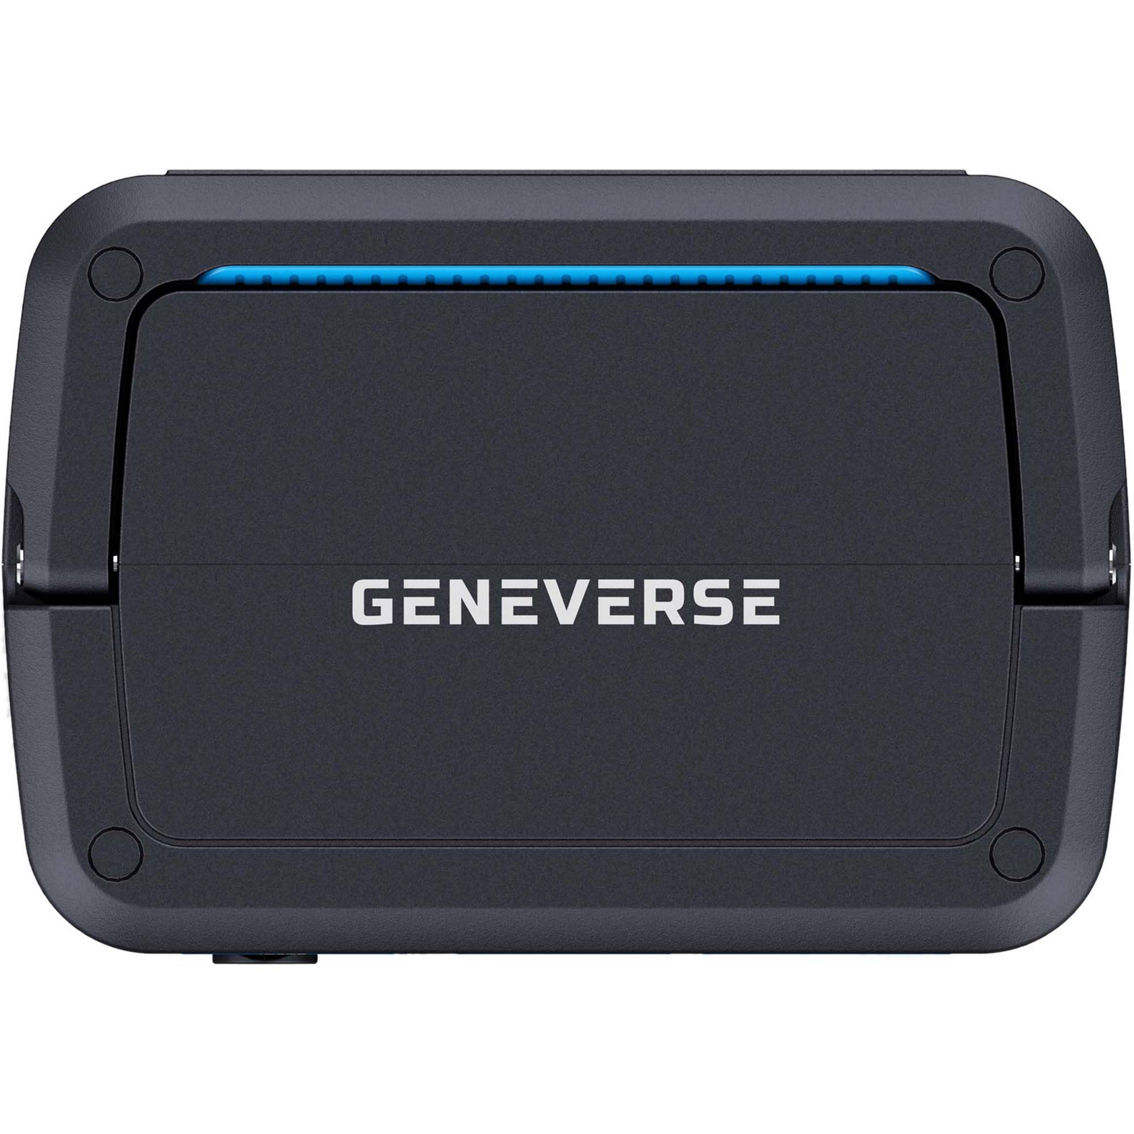 Geneverse HomePower One Battery Backup Power Source - Image 5 of 10